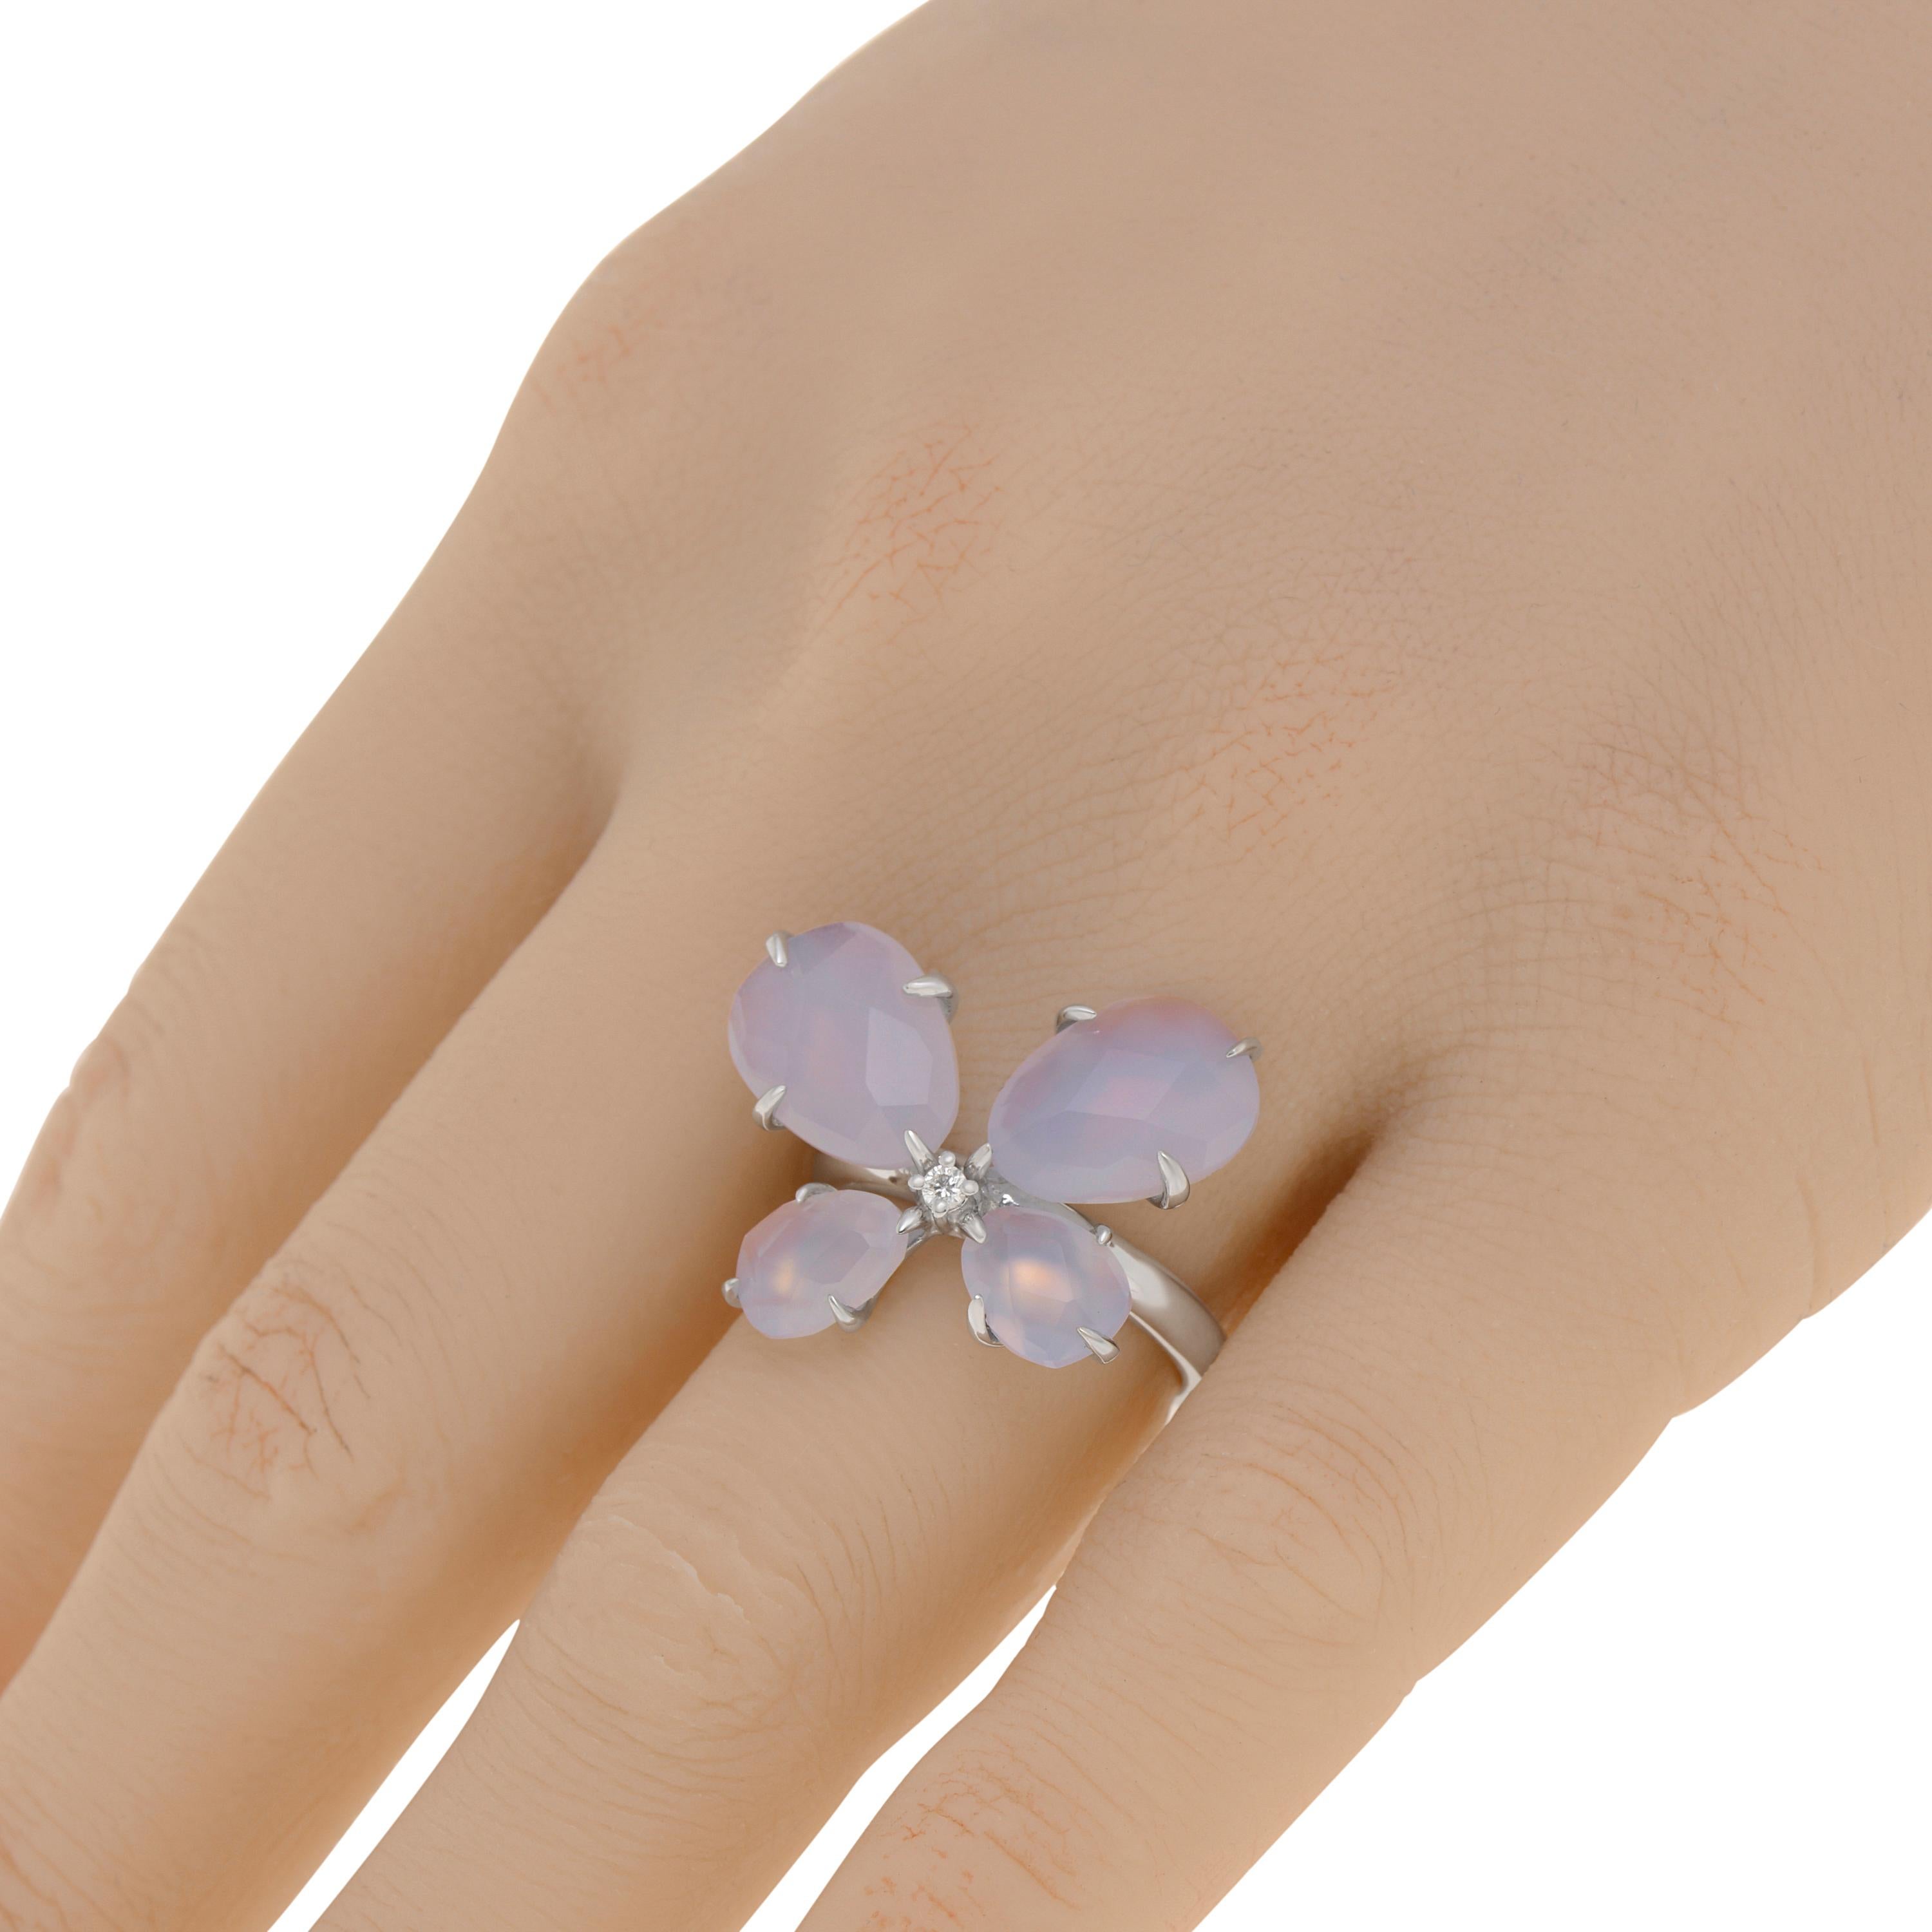 Mimi Milano 18K white gold statement ring features an adorable butterfly design with 0.04ct. tw. diamonds and chalcedony stones. The ring size is 6.25 (52). The decoration size is 7/8